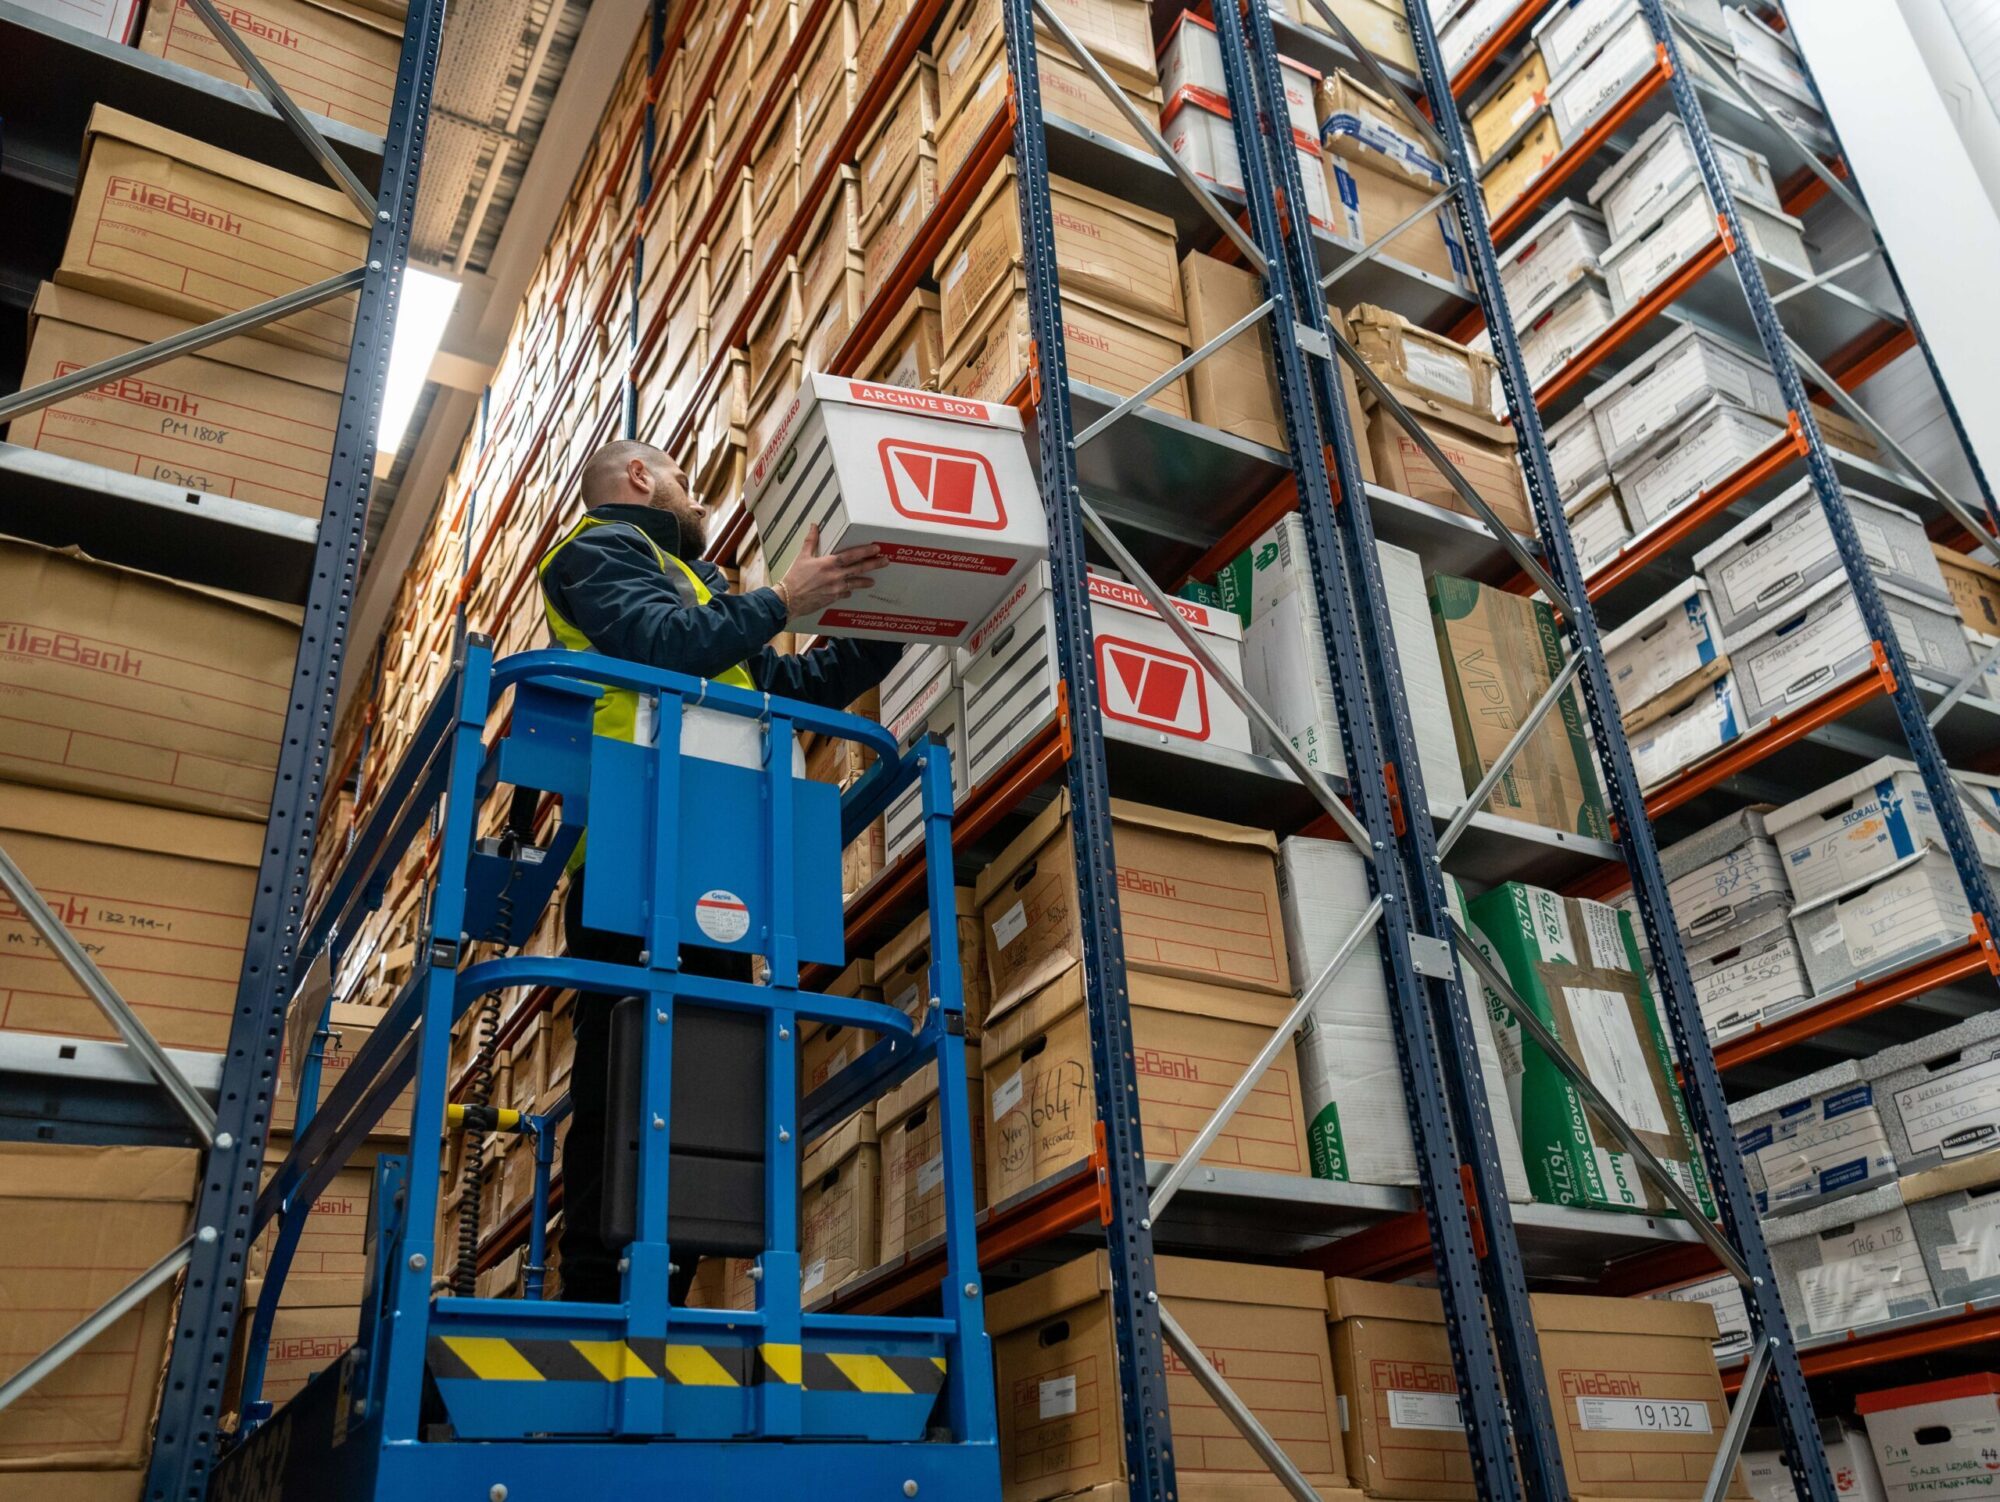 A photo of a Vanguard employee standing on a mobile lift placing a Vanguard cardboard box on a shelf.